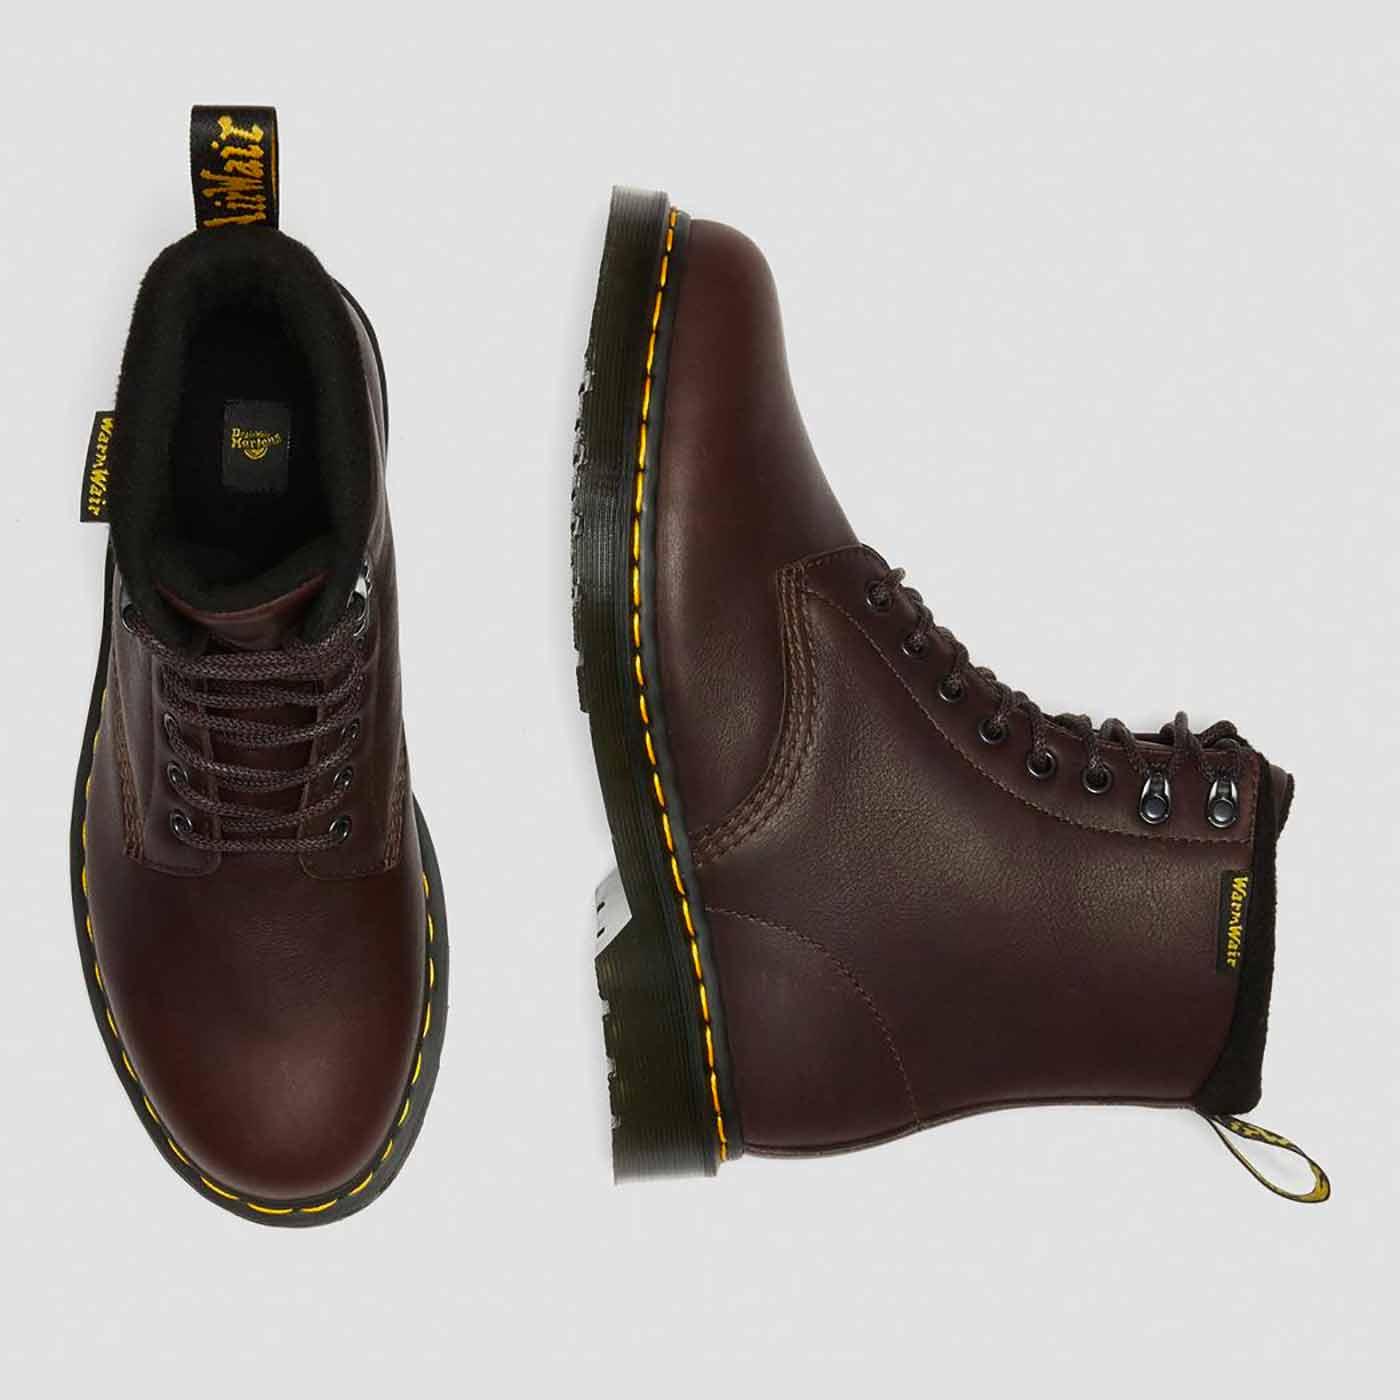 Dr Martens 1460 Pascal WarmWair Valor WP Boots in Dark Brown